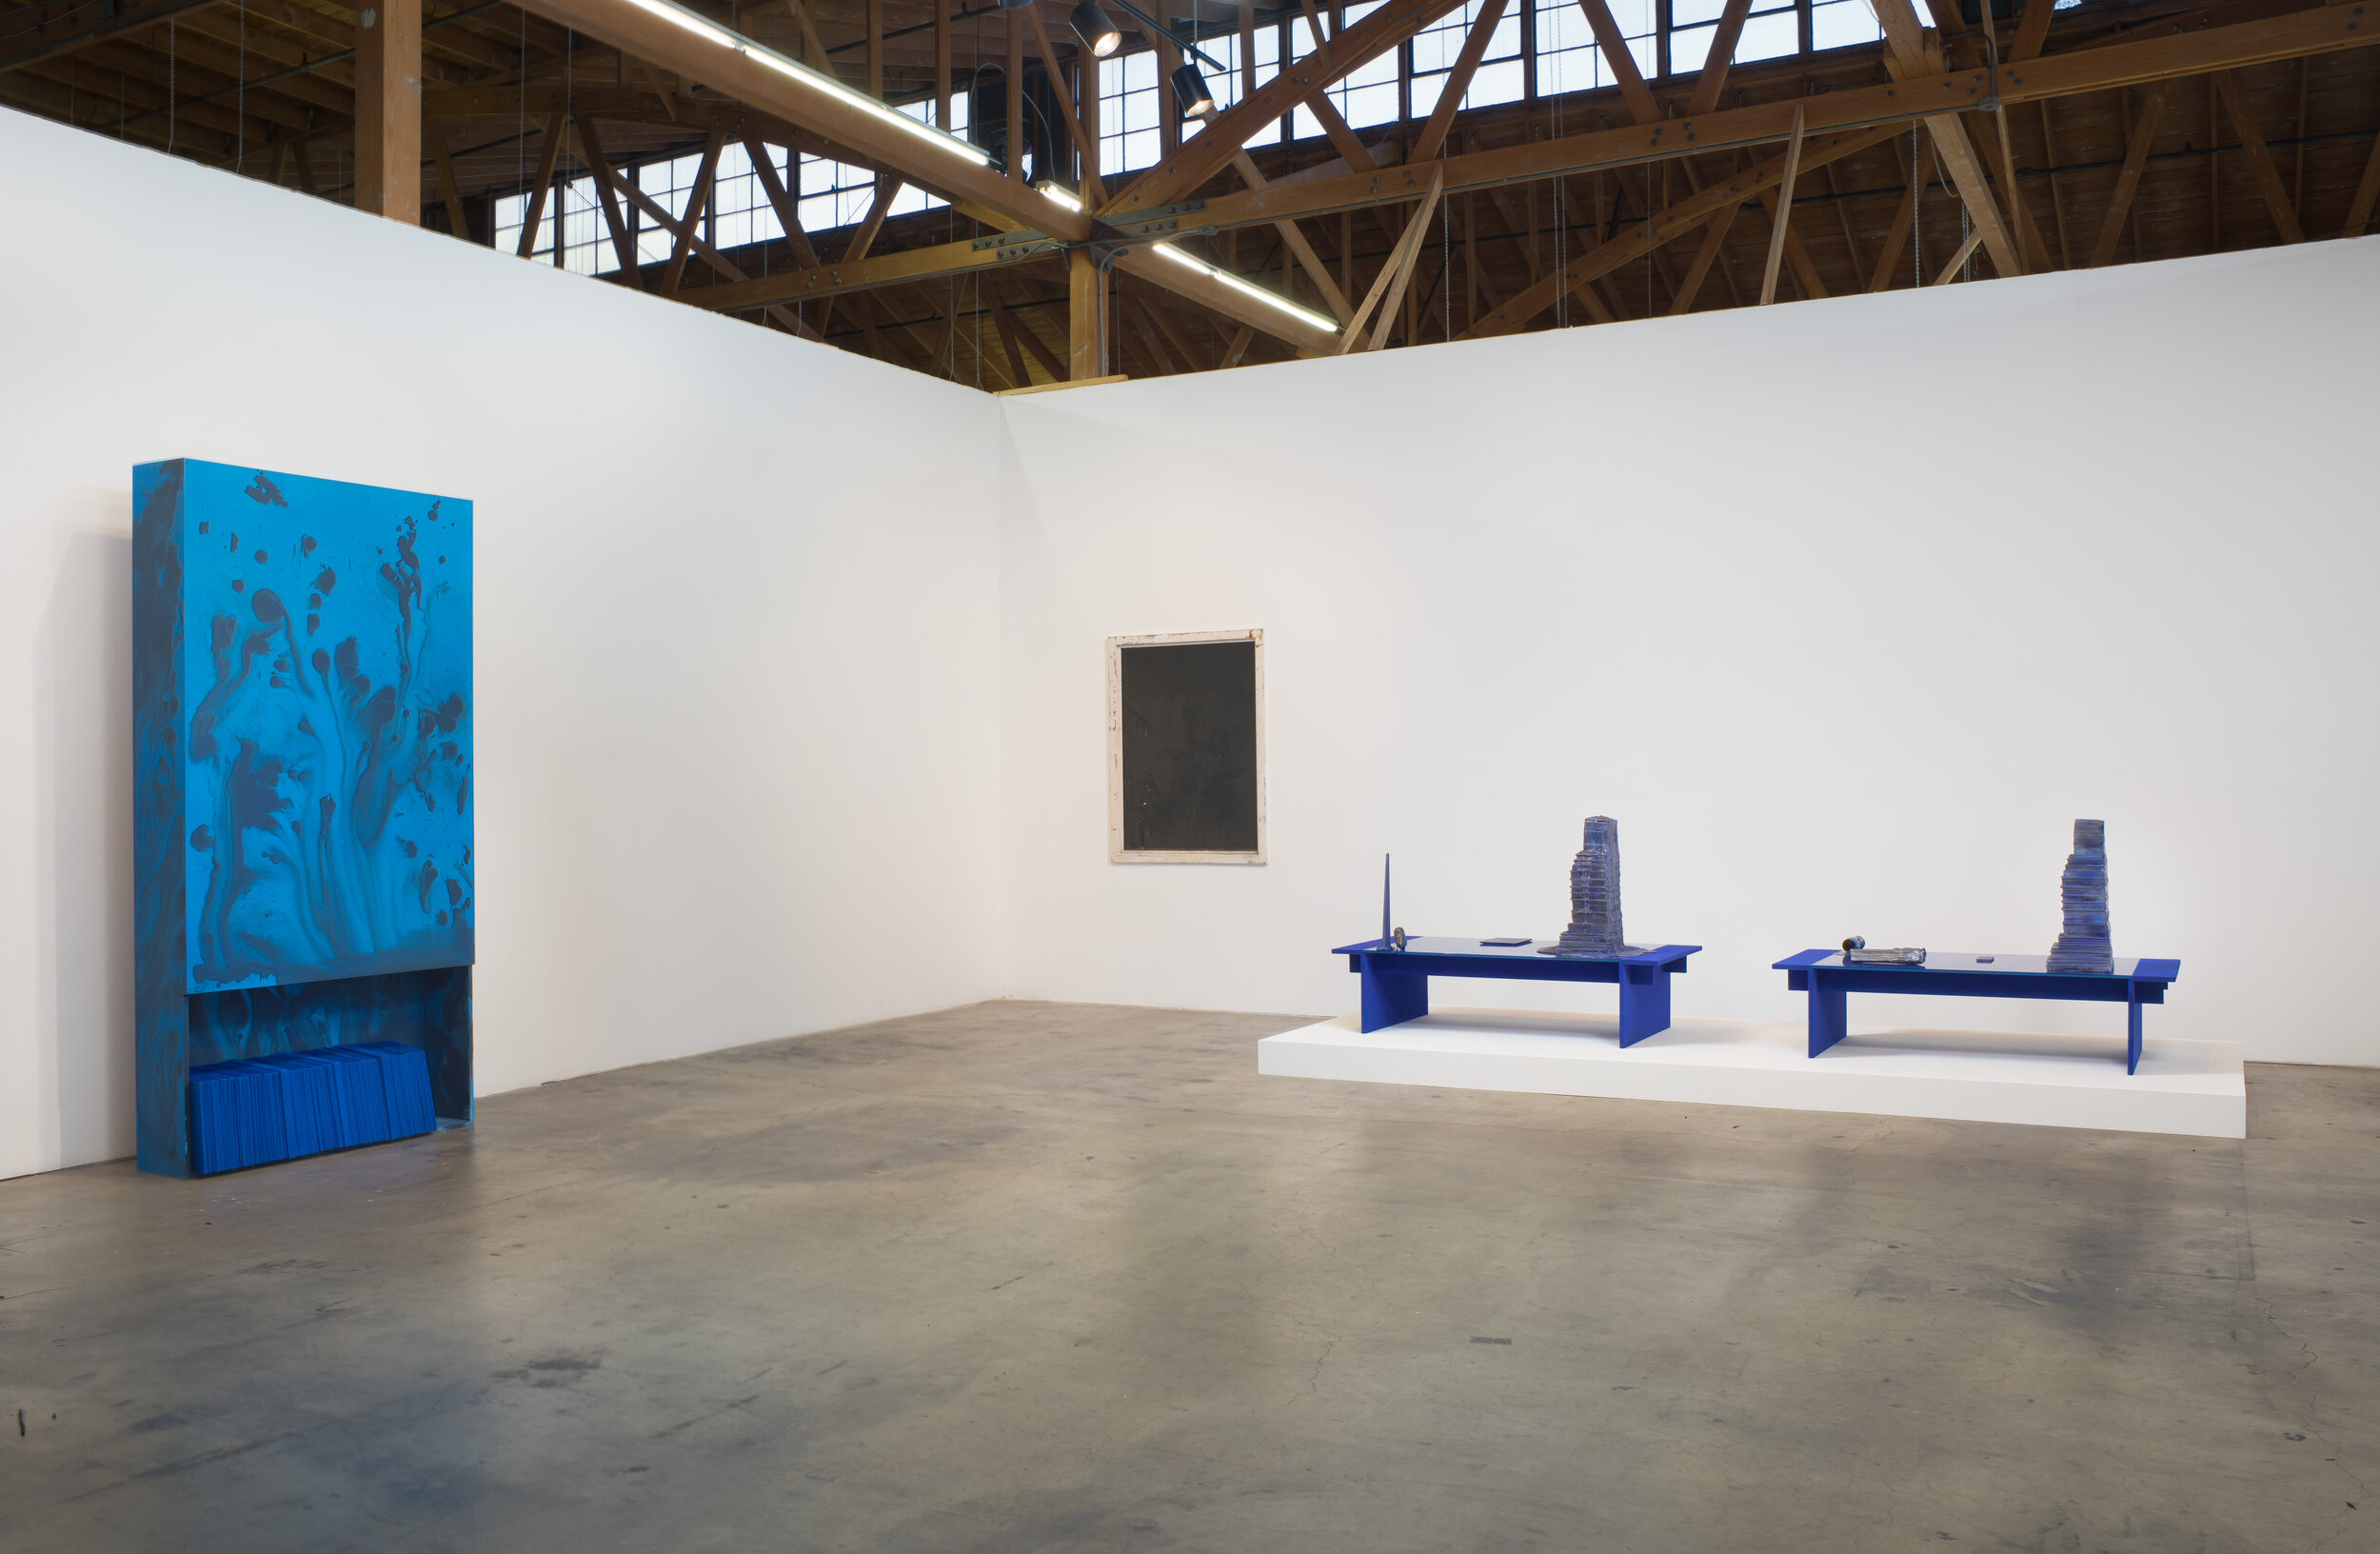  I'm Different, 2014. Installation view 